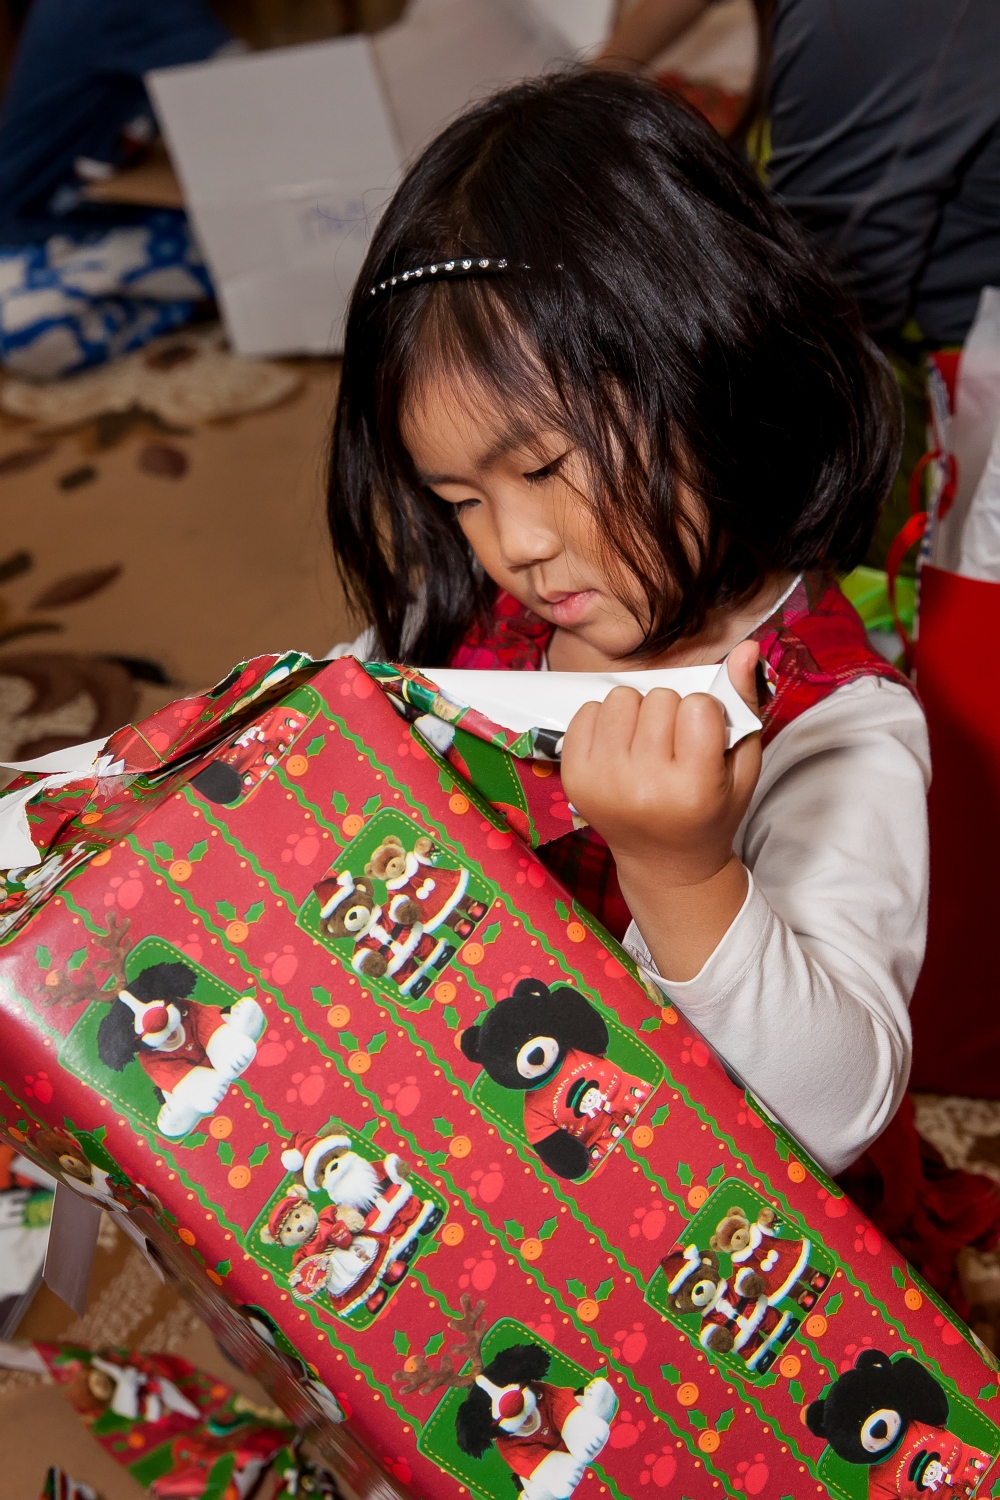 Opening Christmas gifts on New Year's Eve